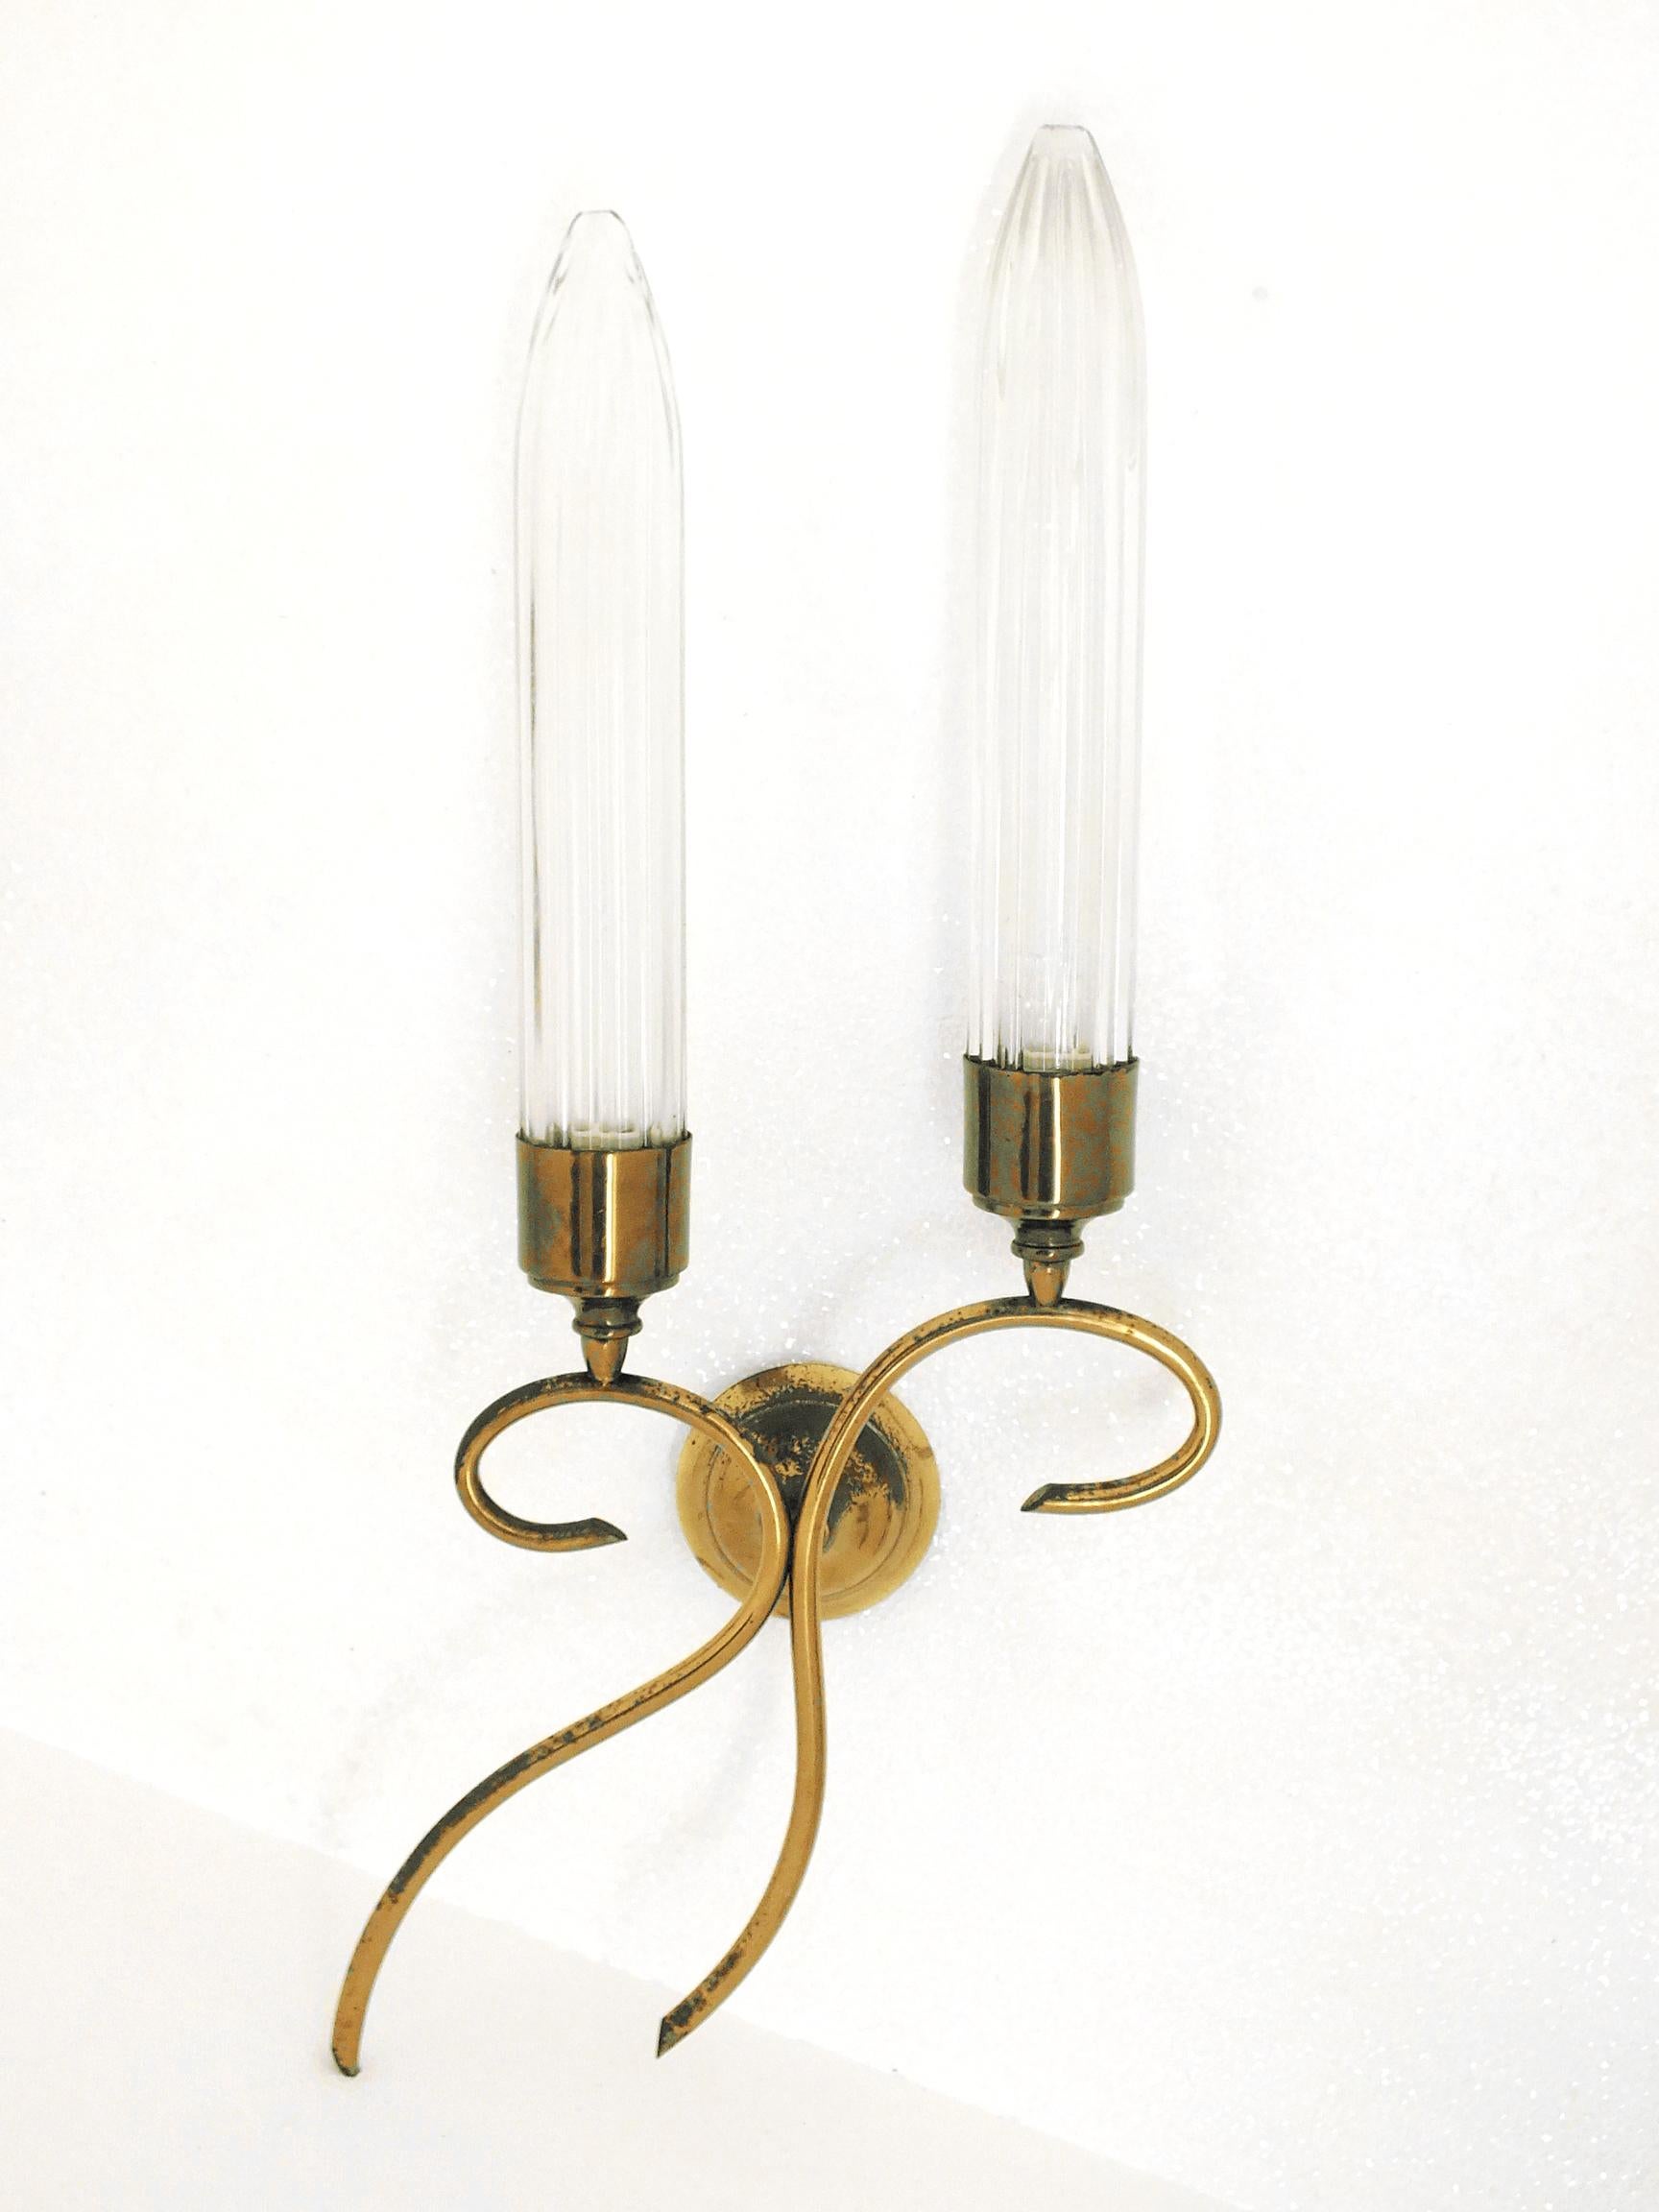 50s Design Wall Lamps by Seguso Italy, Set of 3 In Excellent Condition For Sale In Biella, IT